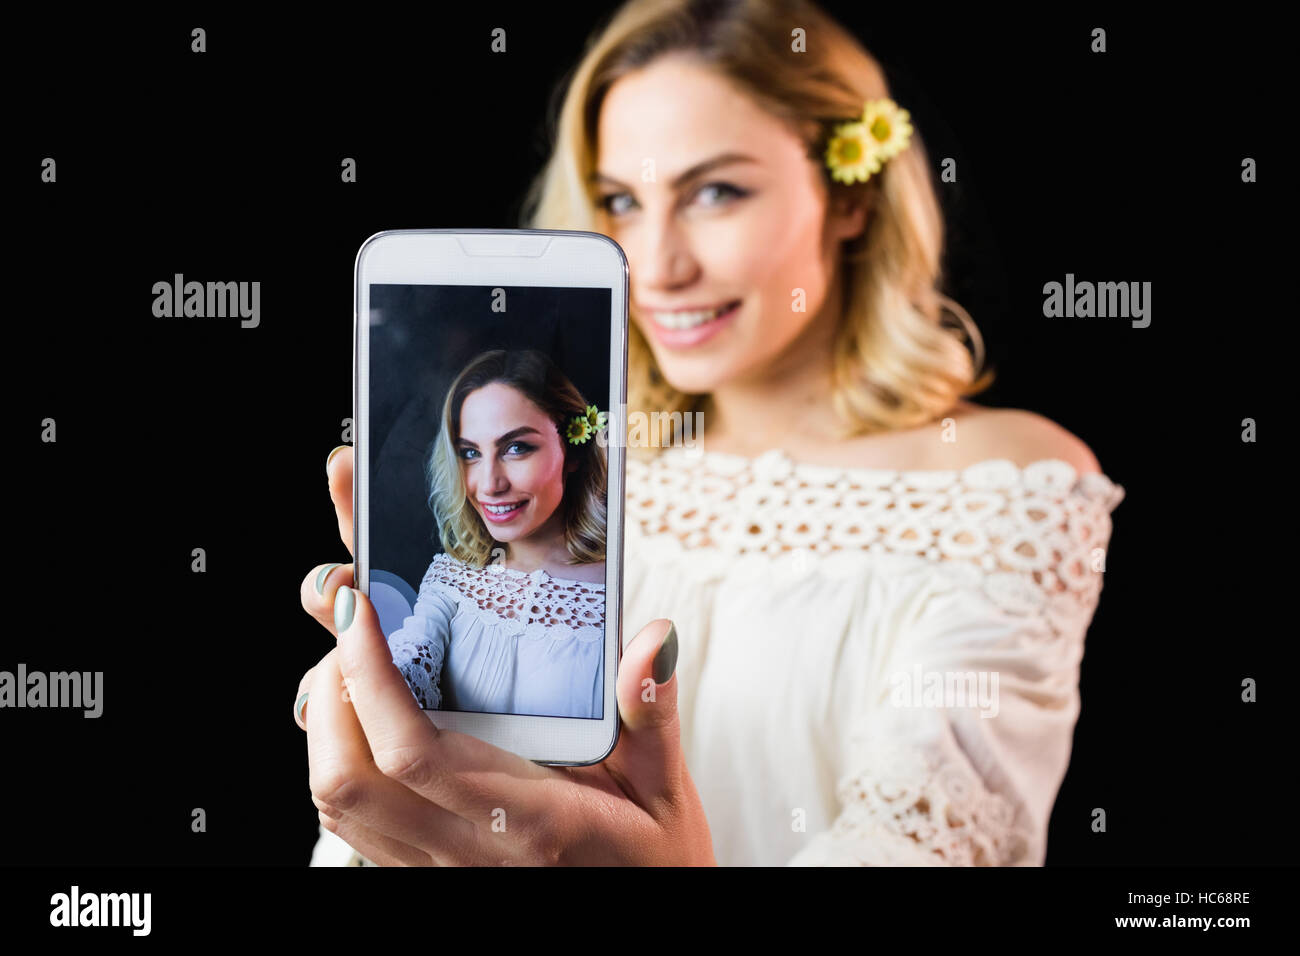 Beautiful woman clicking photo from mobile phone against black background Stock Photo